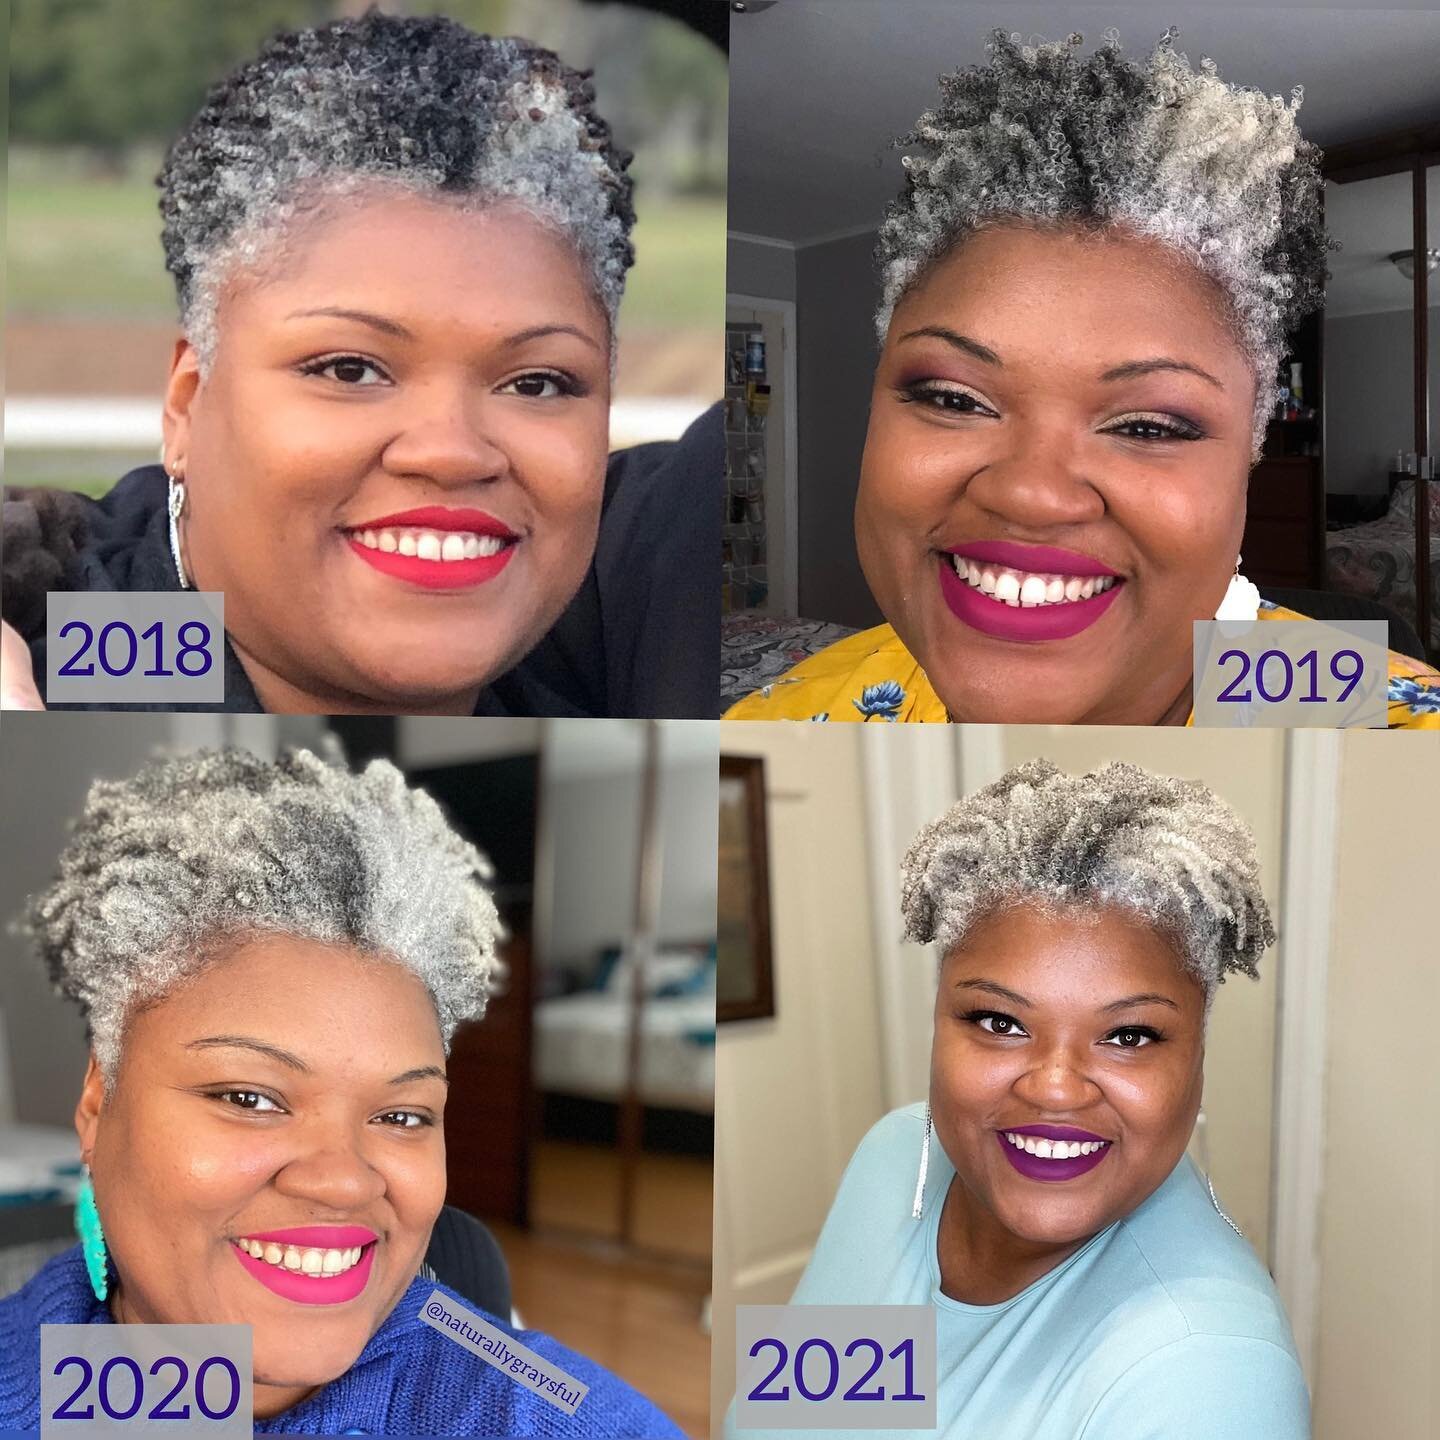 How long have you been dyefree? This May will be 4years for me.

My #grayhair has taught me patience and trusting the process. If you don&rsquo;t stop you will see results.

My best tip for patience is to DocuMent Document Document!

With pictures yo